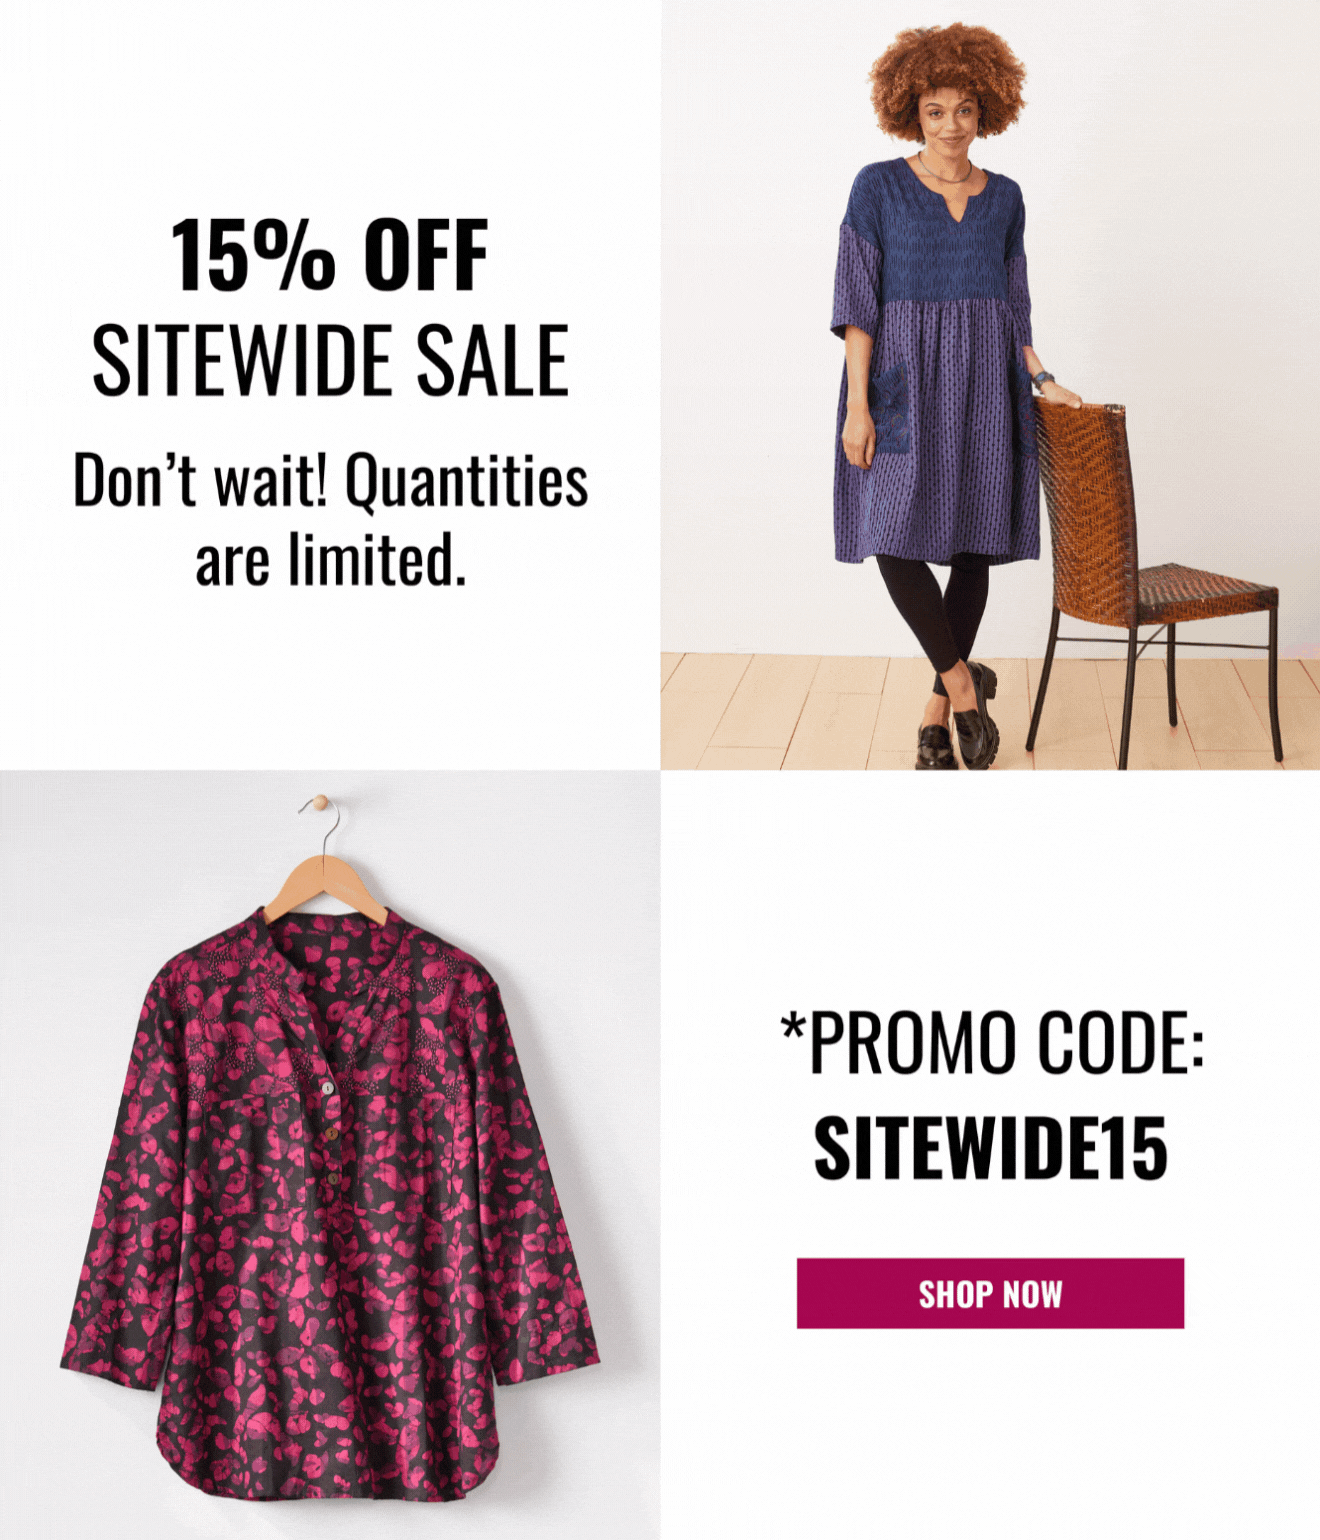 15% OFF SITEWIDE SALE Don't wait! Quantities are limited. *PROMO CODE: SITEWIDE15 SHOP NOW